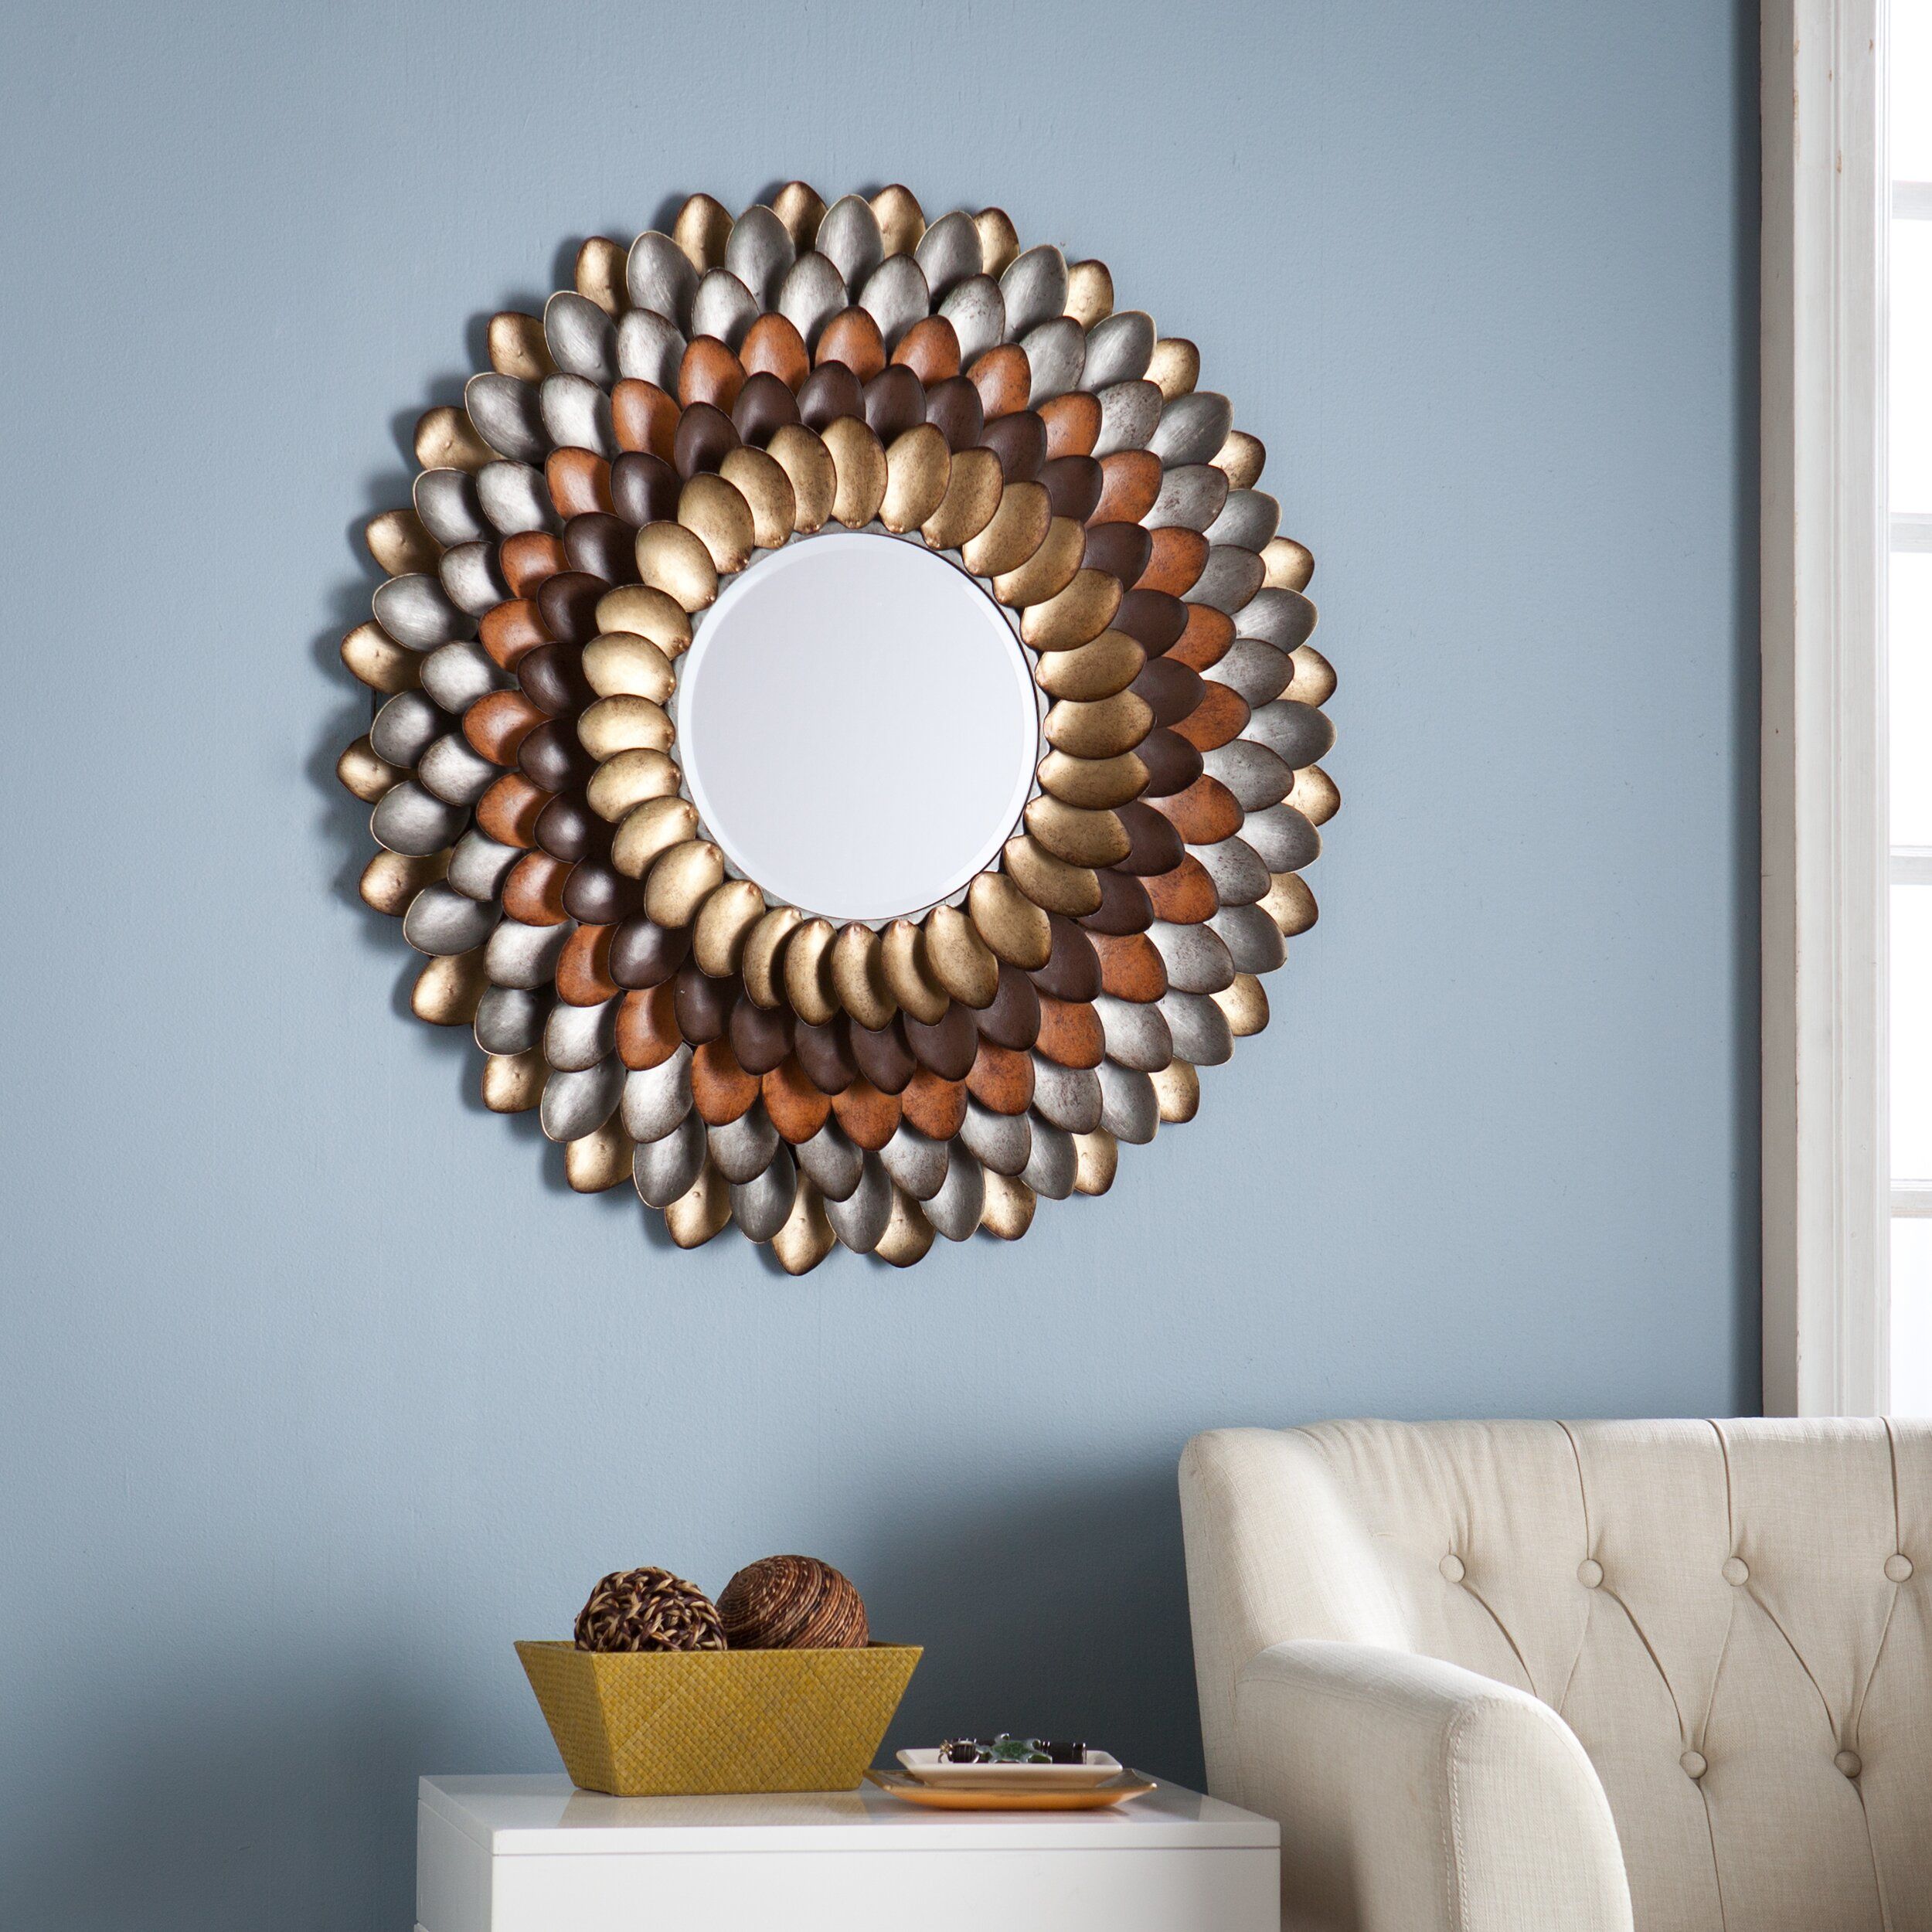 Wildon Home ® Abrams Decorative Round Wall Mirror & Reviews | Wayfair In Vertical Round Wall Mirrors (View 13 of 15)